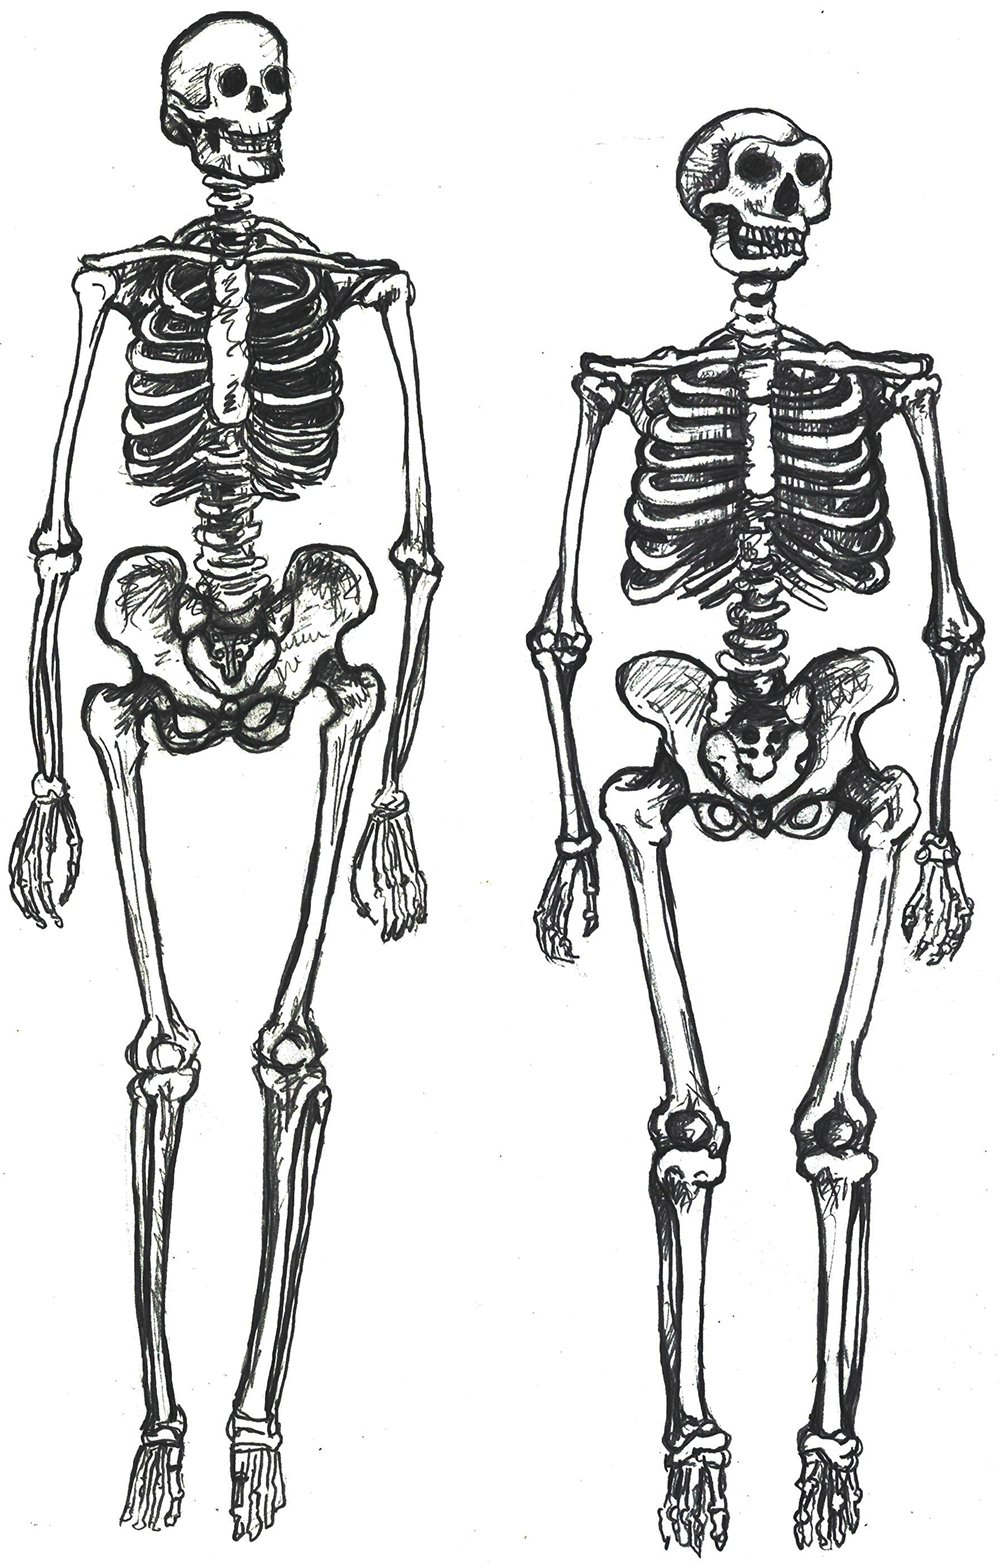 Two complete skeletons. The left is taller with a thinner frame.